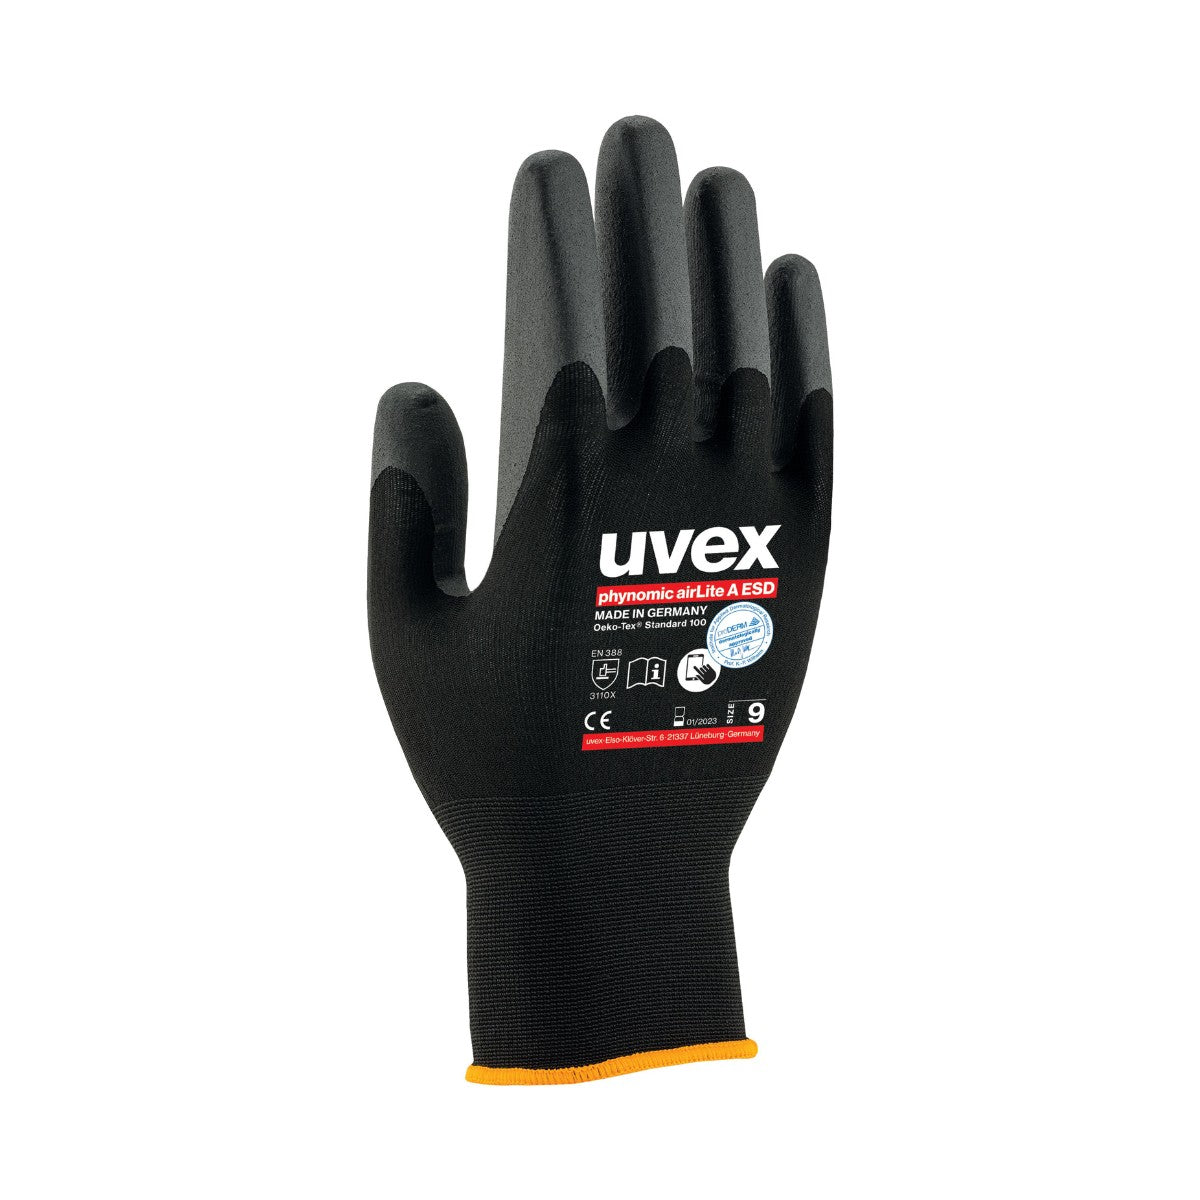 uvex Assembly Gloves uvex Phynomic AirLite A ESD 60038 (Pack of 10)